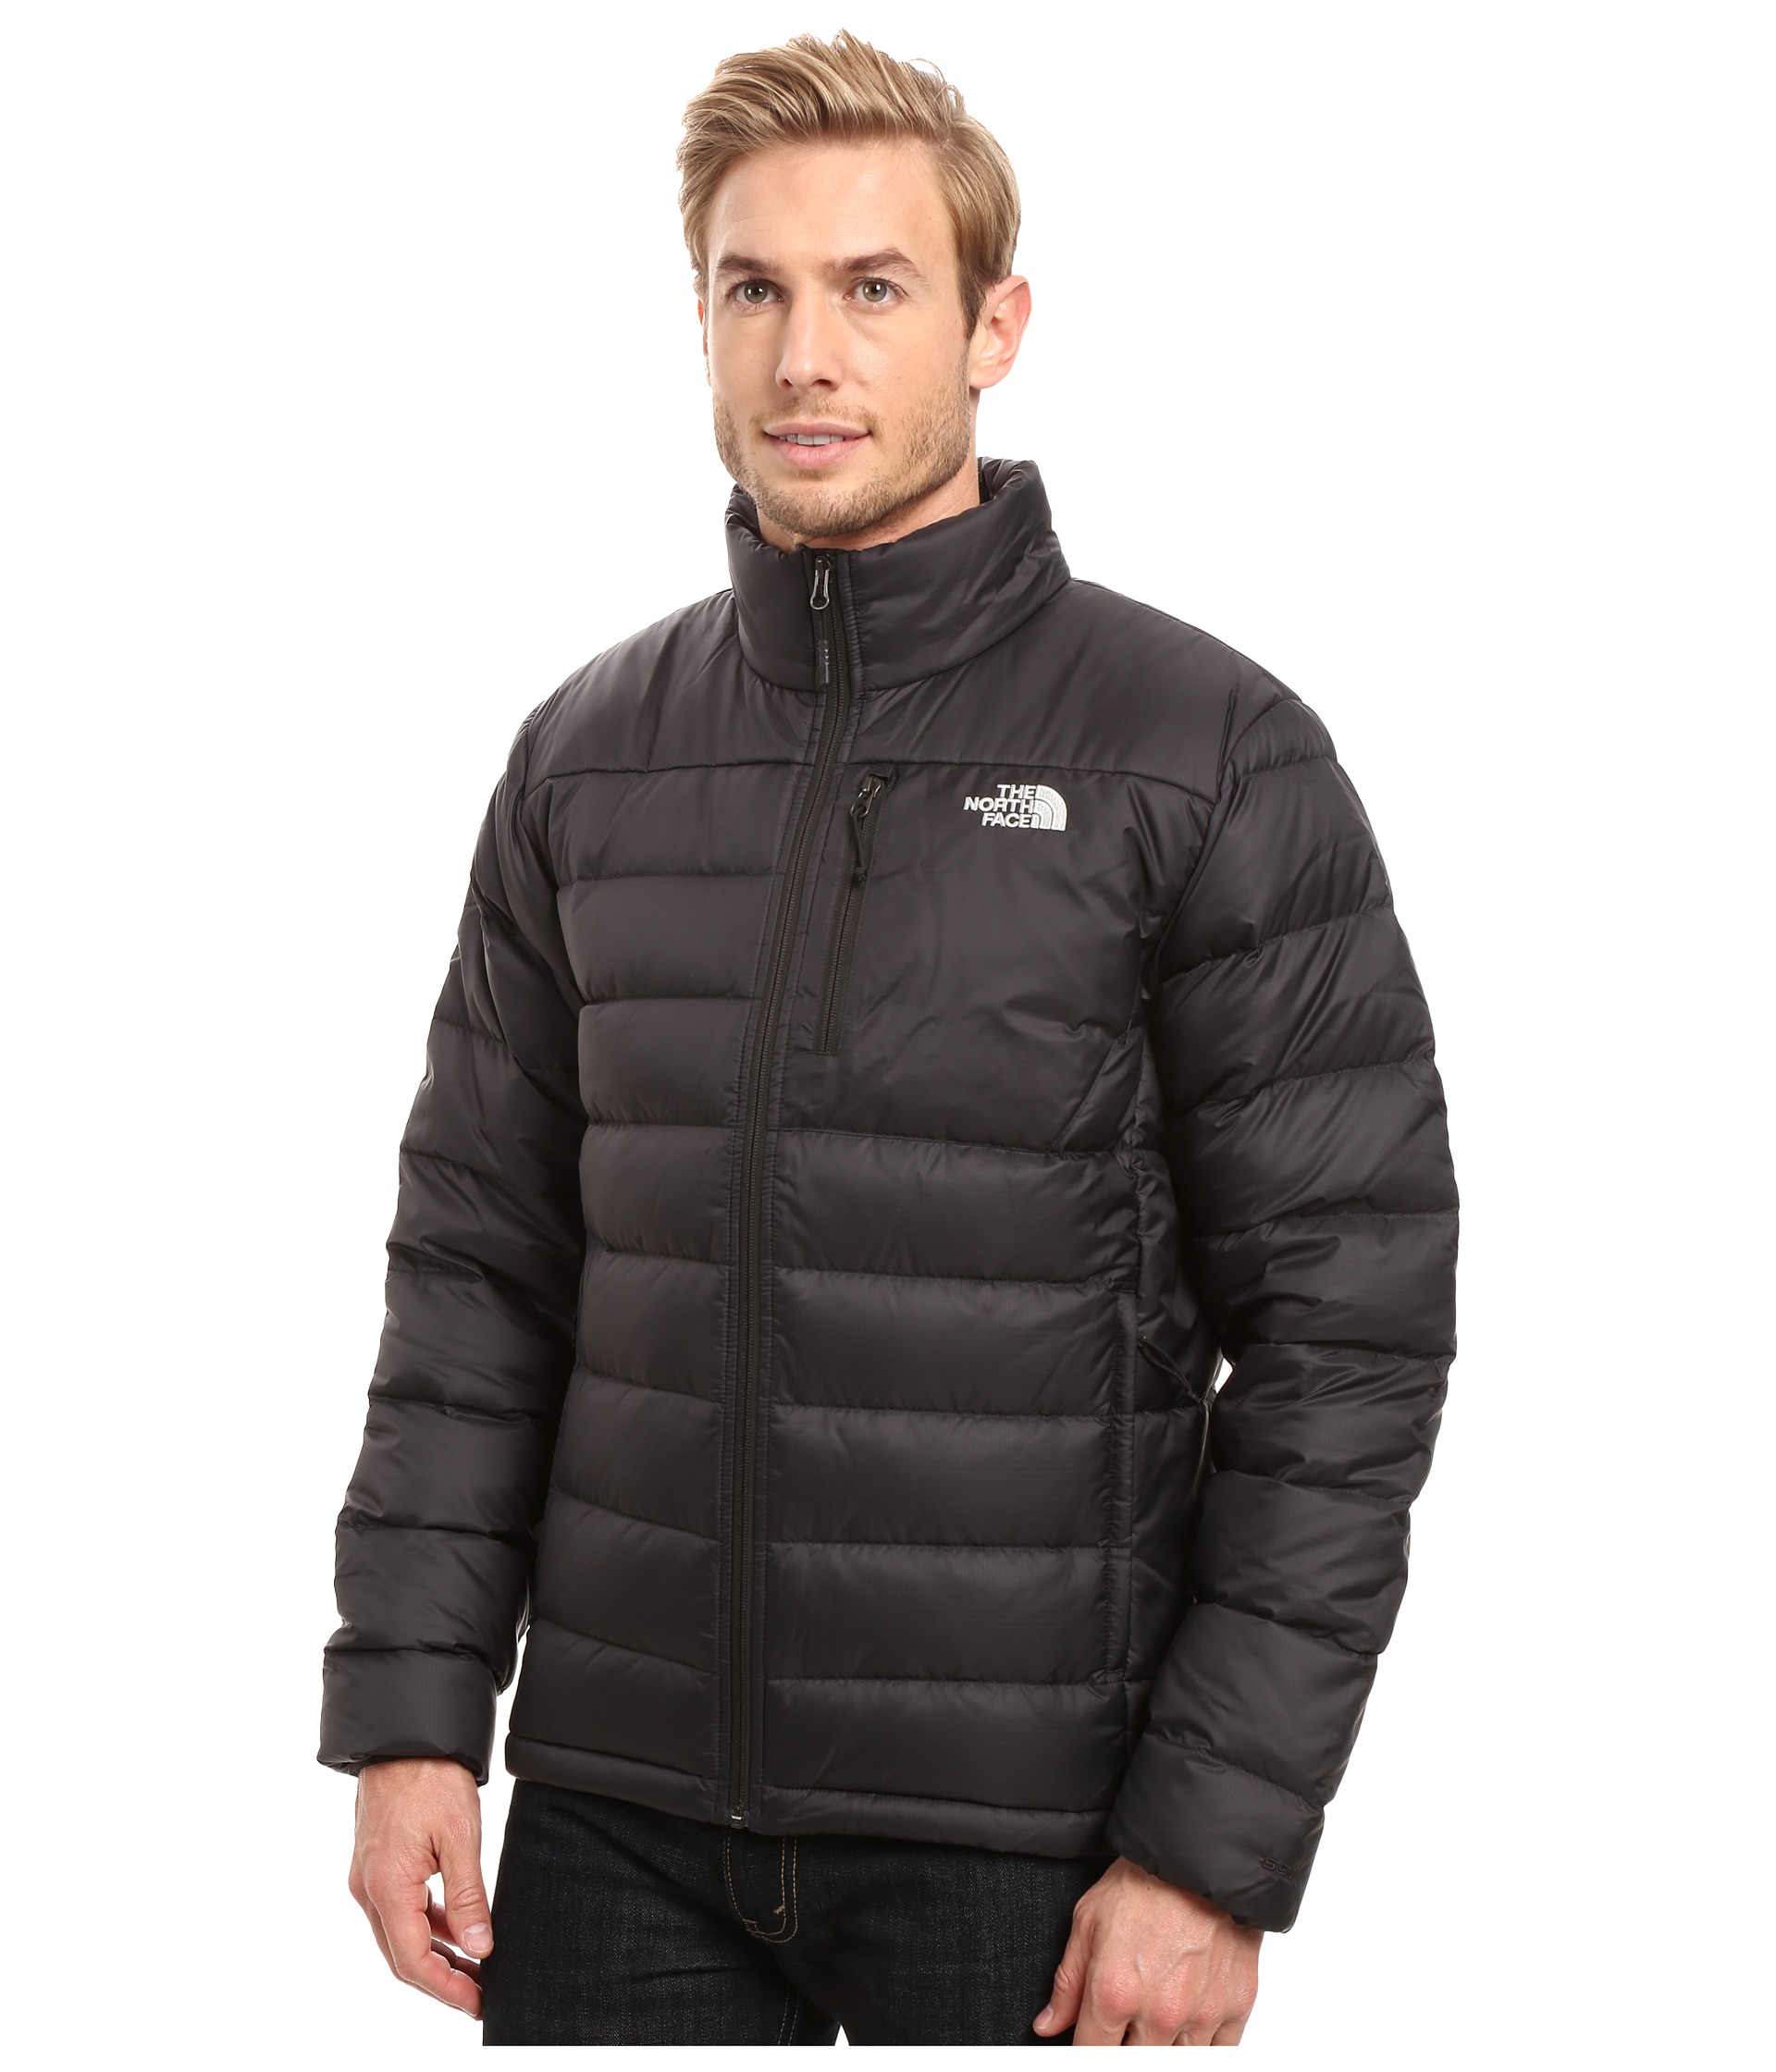 The North Face Aconcagua Jacket at Zappos.com